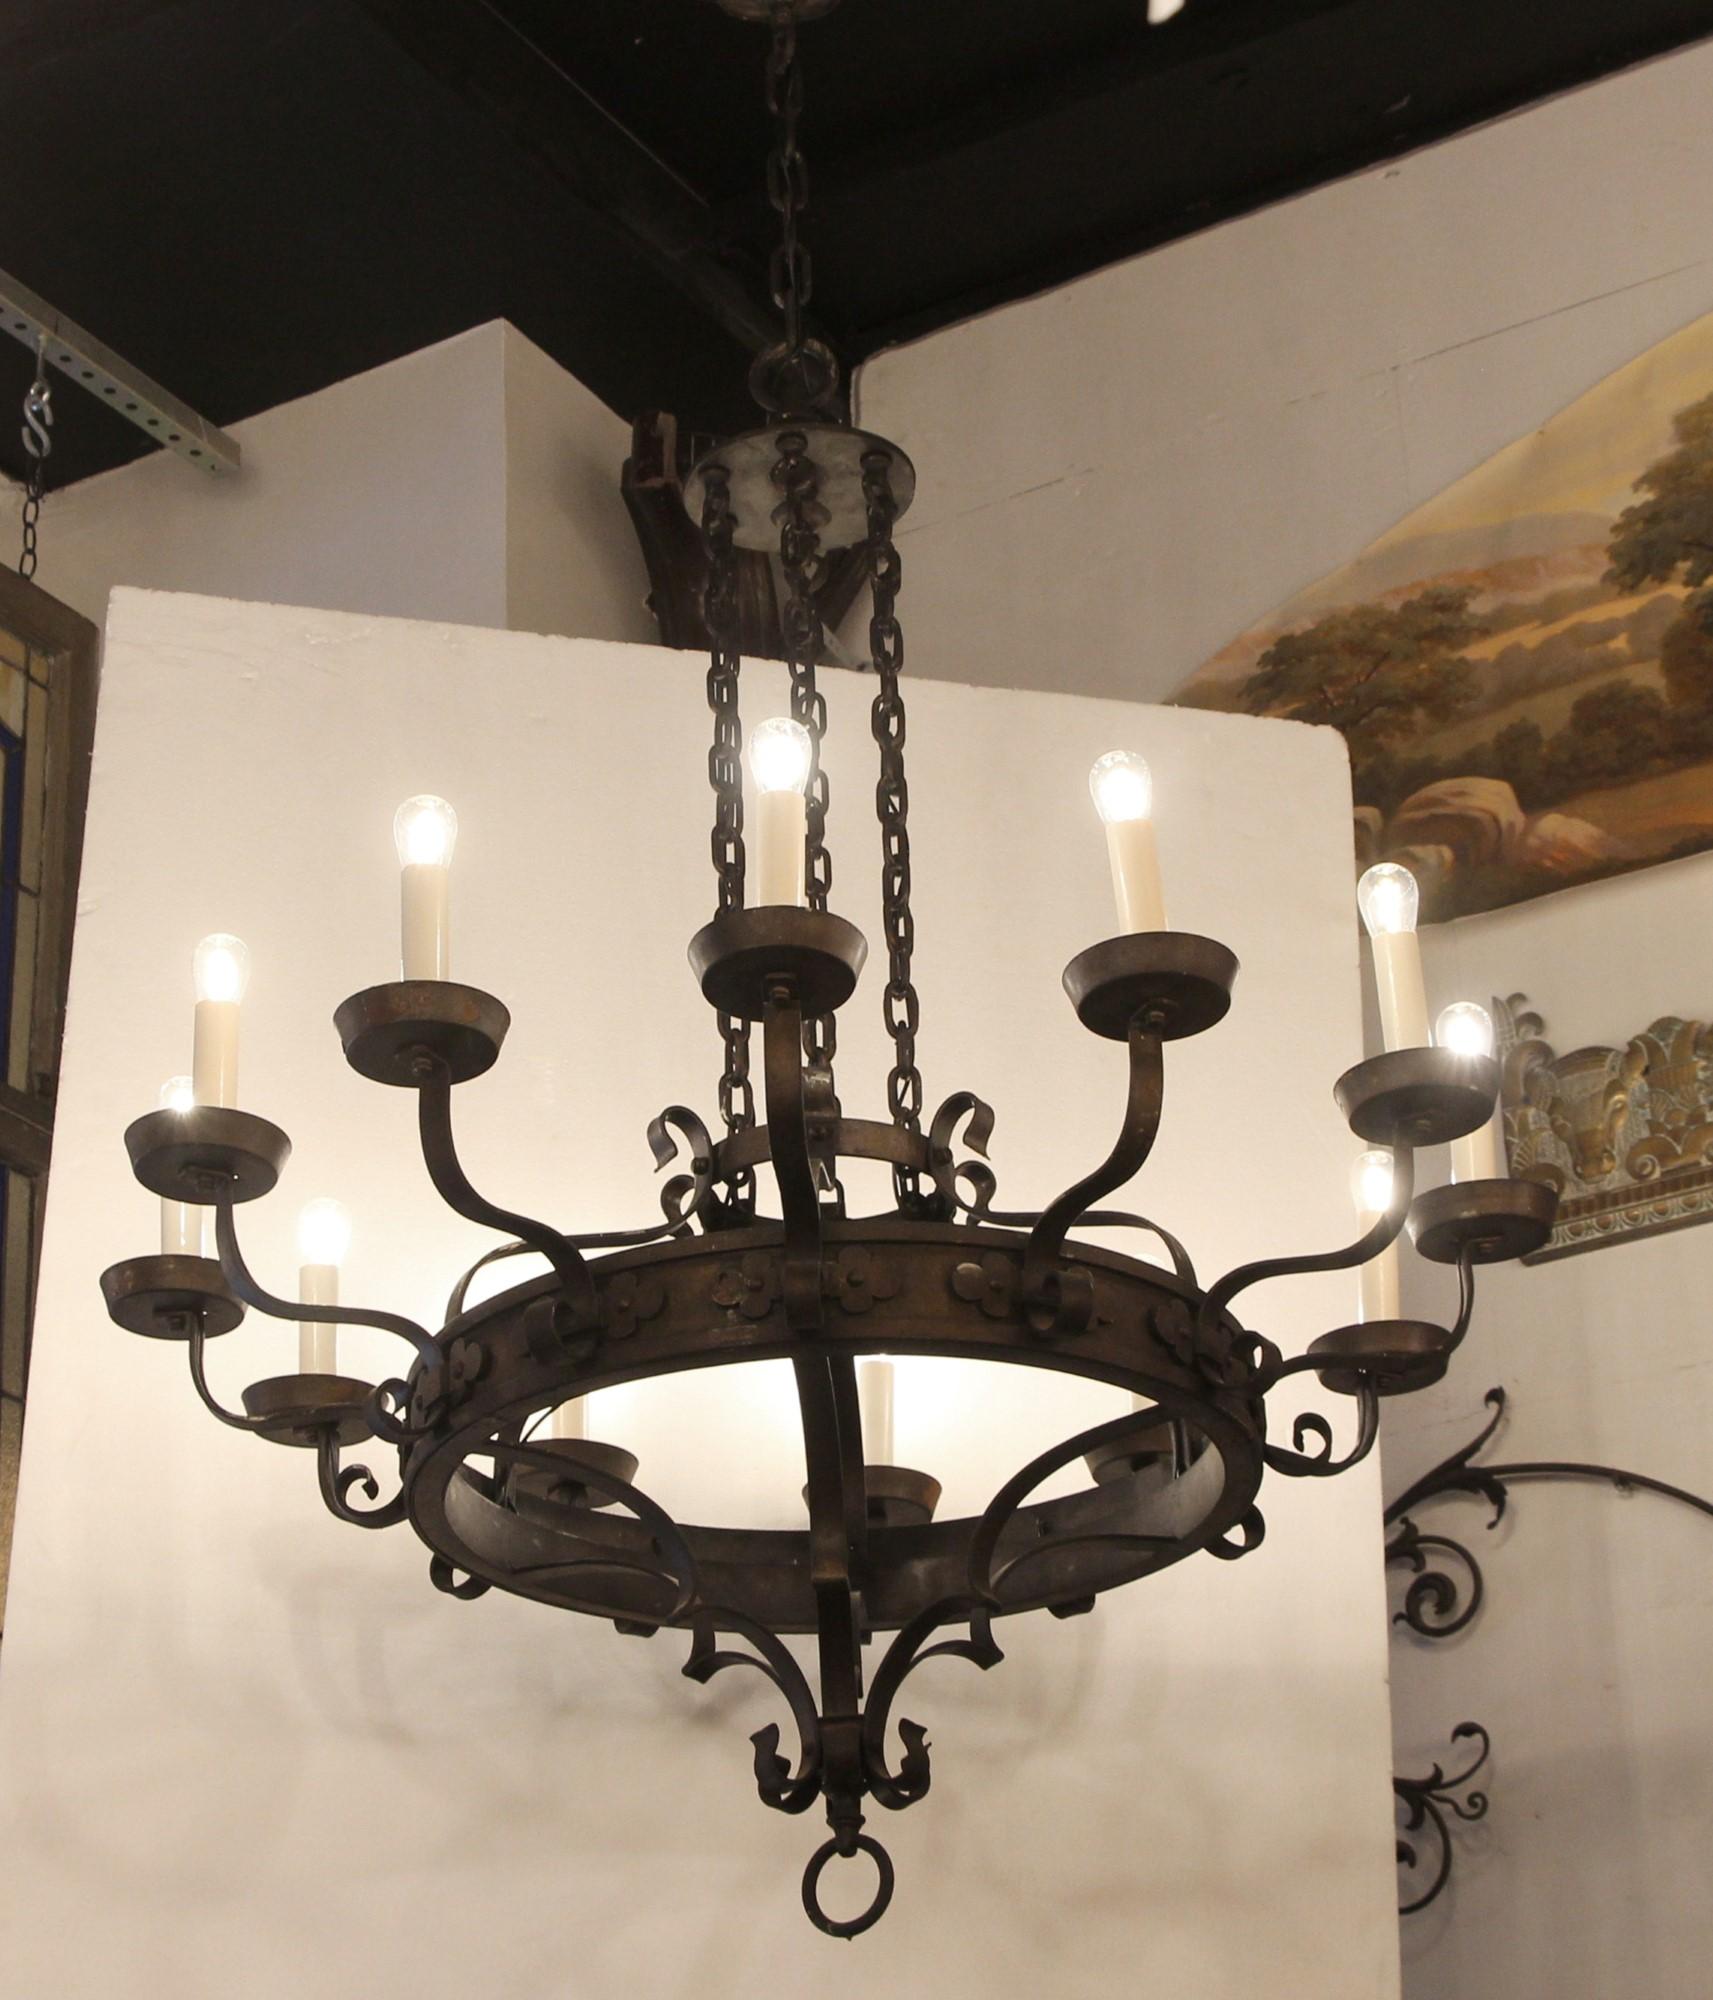 Arts and Crafts Arts & Crafts 12 Light Wrought Iron Chandelier Large Scale with Chain, Scrolls For Sale